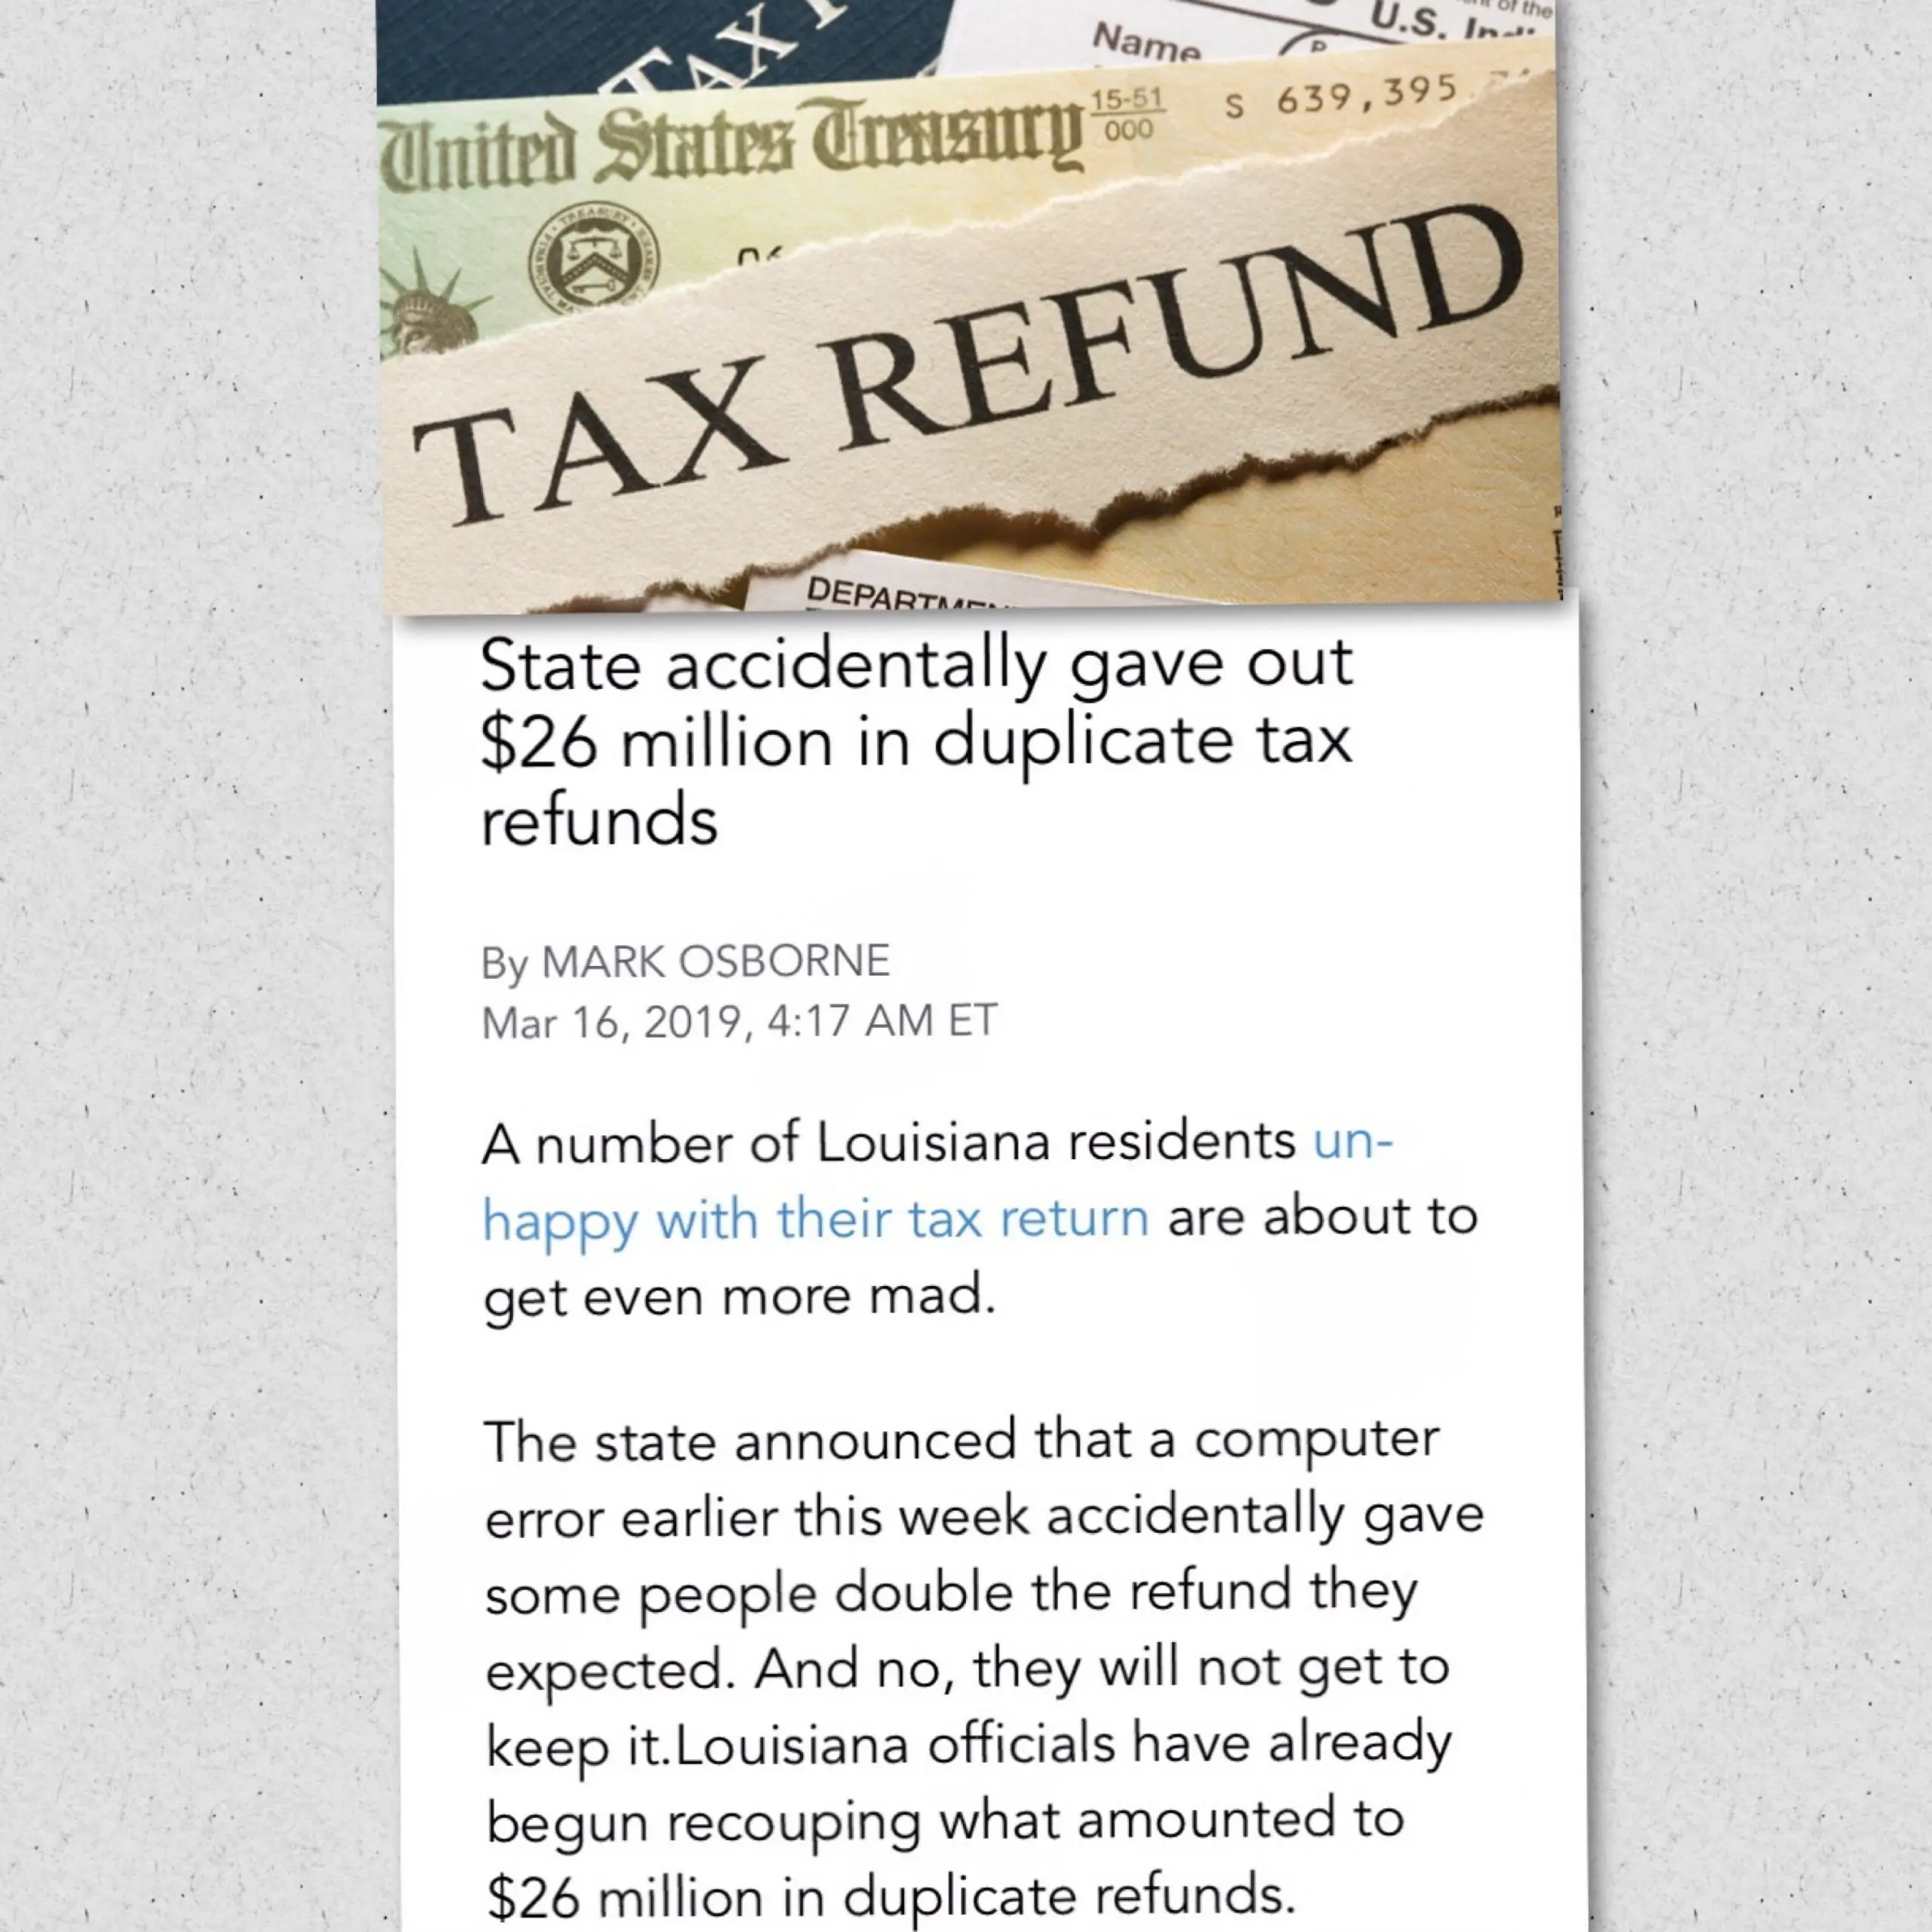 Tax refunds  DAILY SOCIAL INFORM